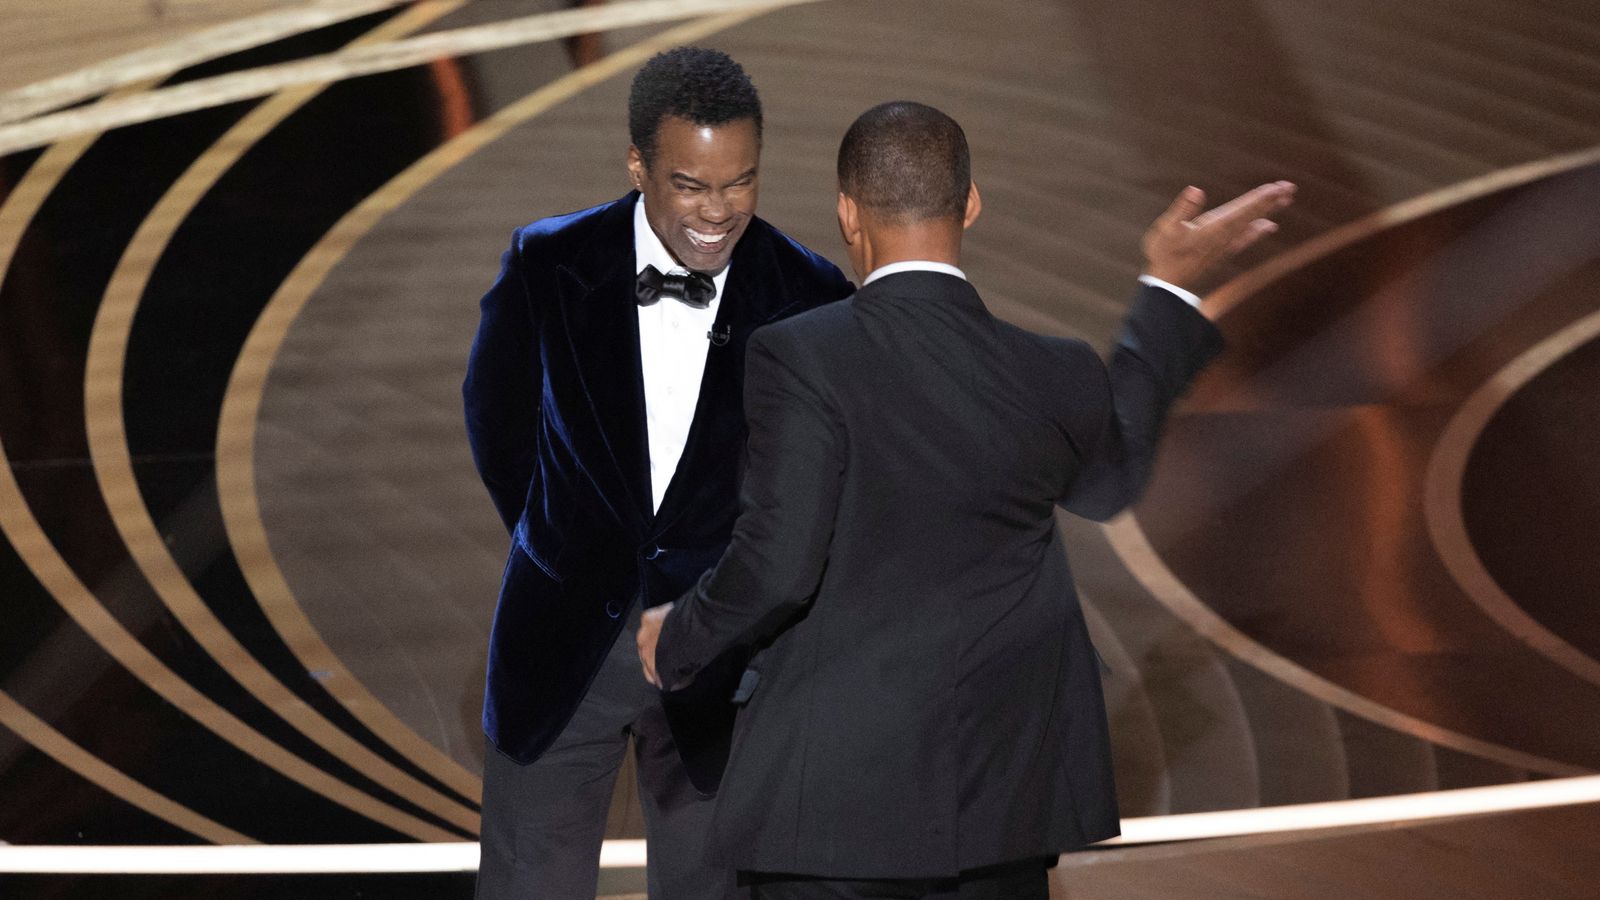 Will Smith and Chris Rock discuss CBDC at the Oscars Blank Meme Template